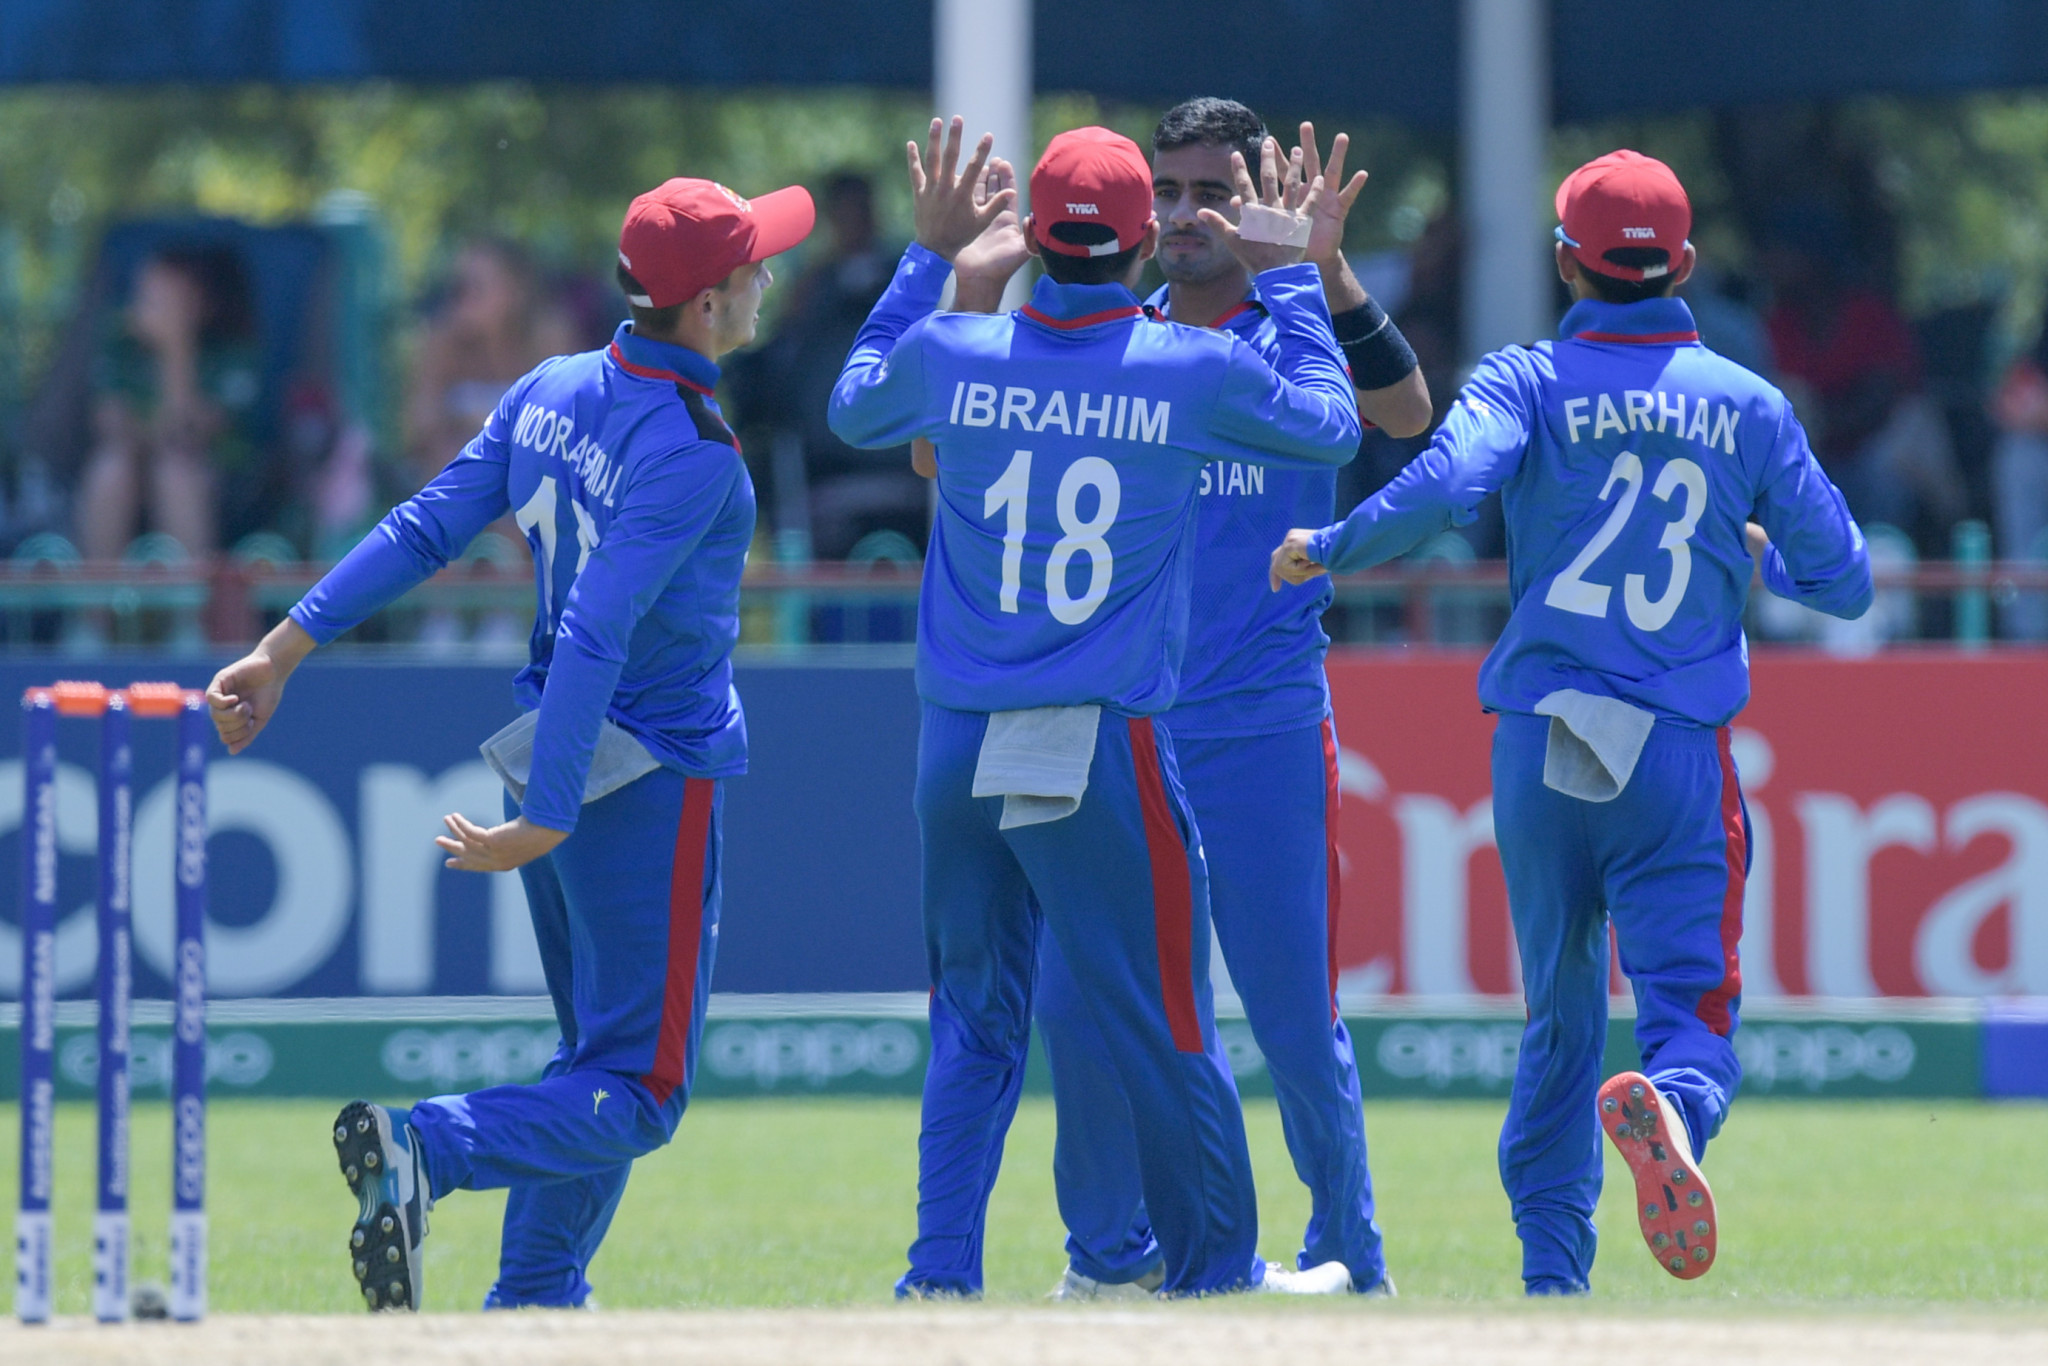 It was Afghanistan's day as they began the ICC Under-19 World Cup with victory over the hosts in Kimberley, South Africa ©Getty Images